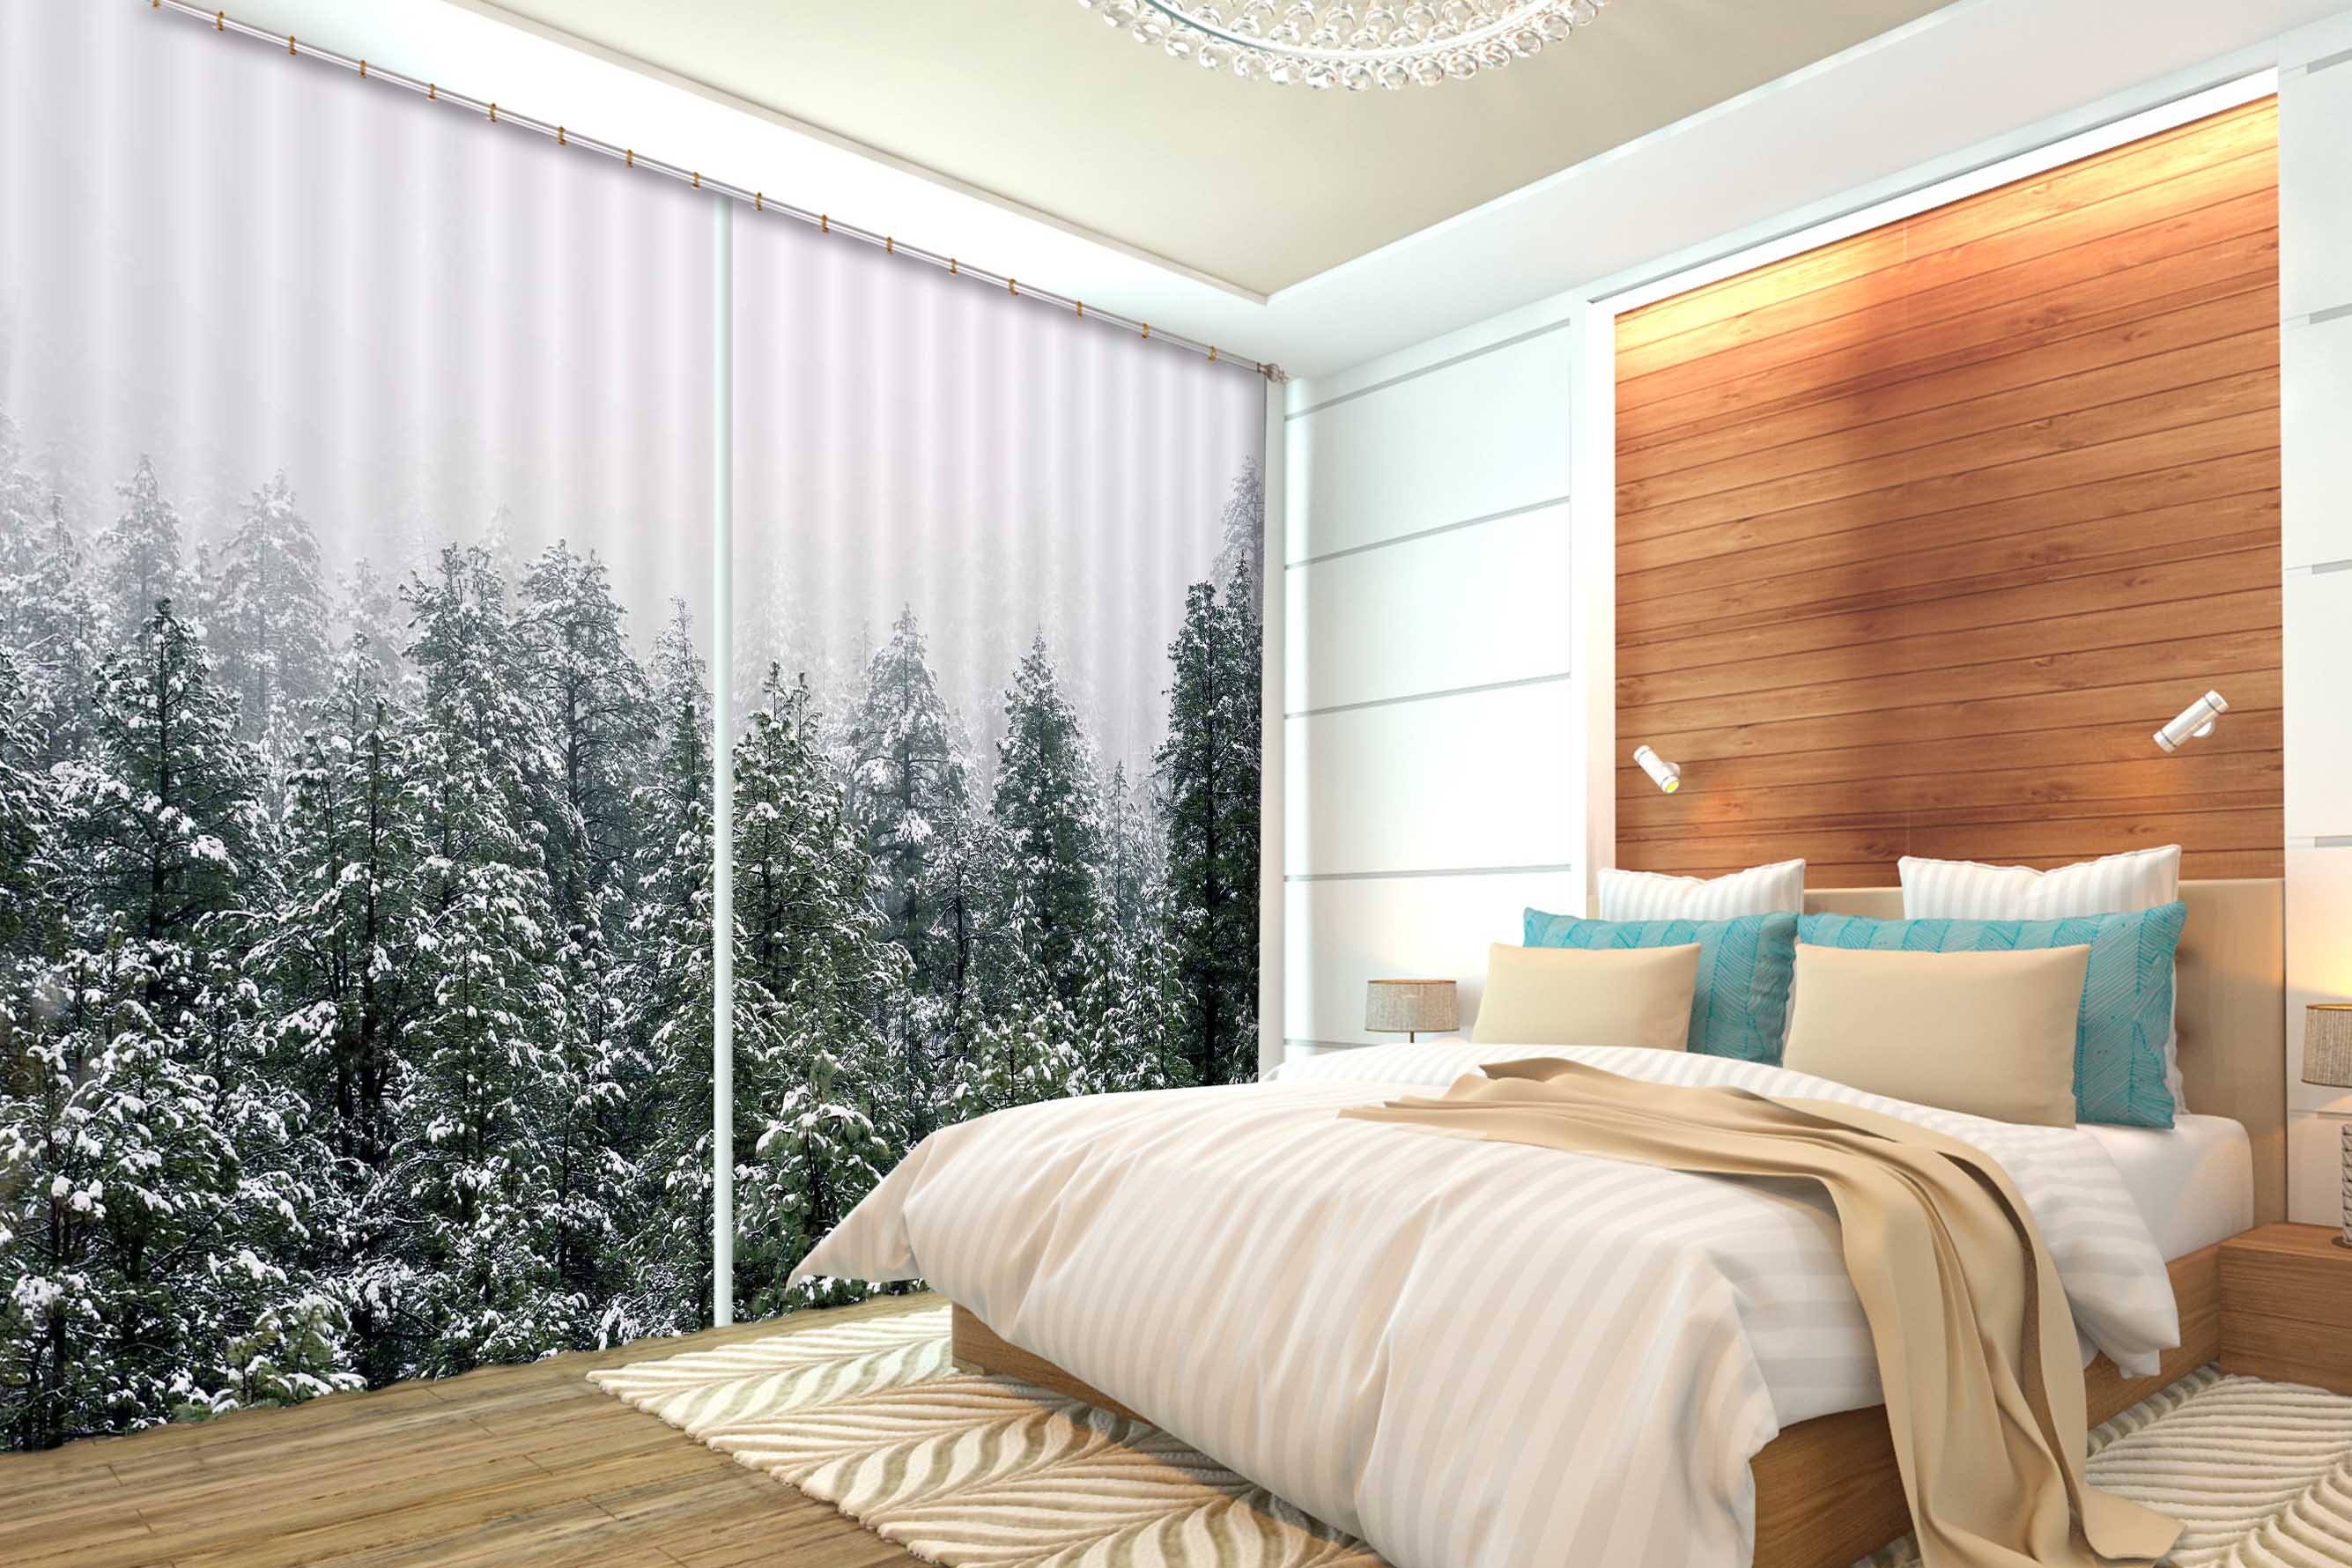 3D Heavy Snow Forest 129 Curtains Drapes